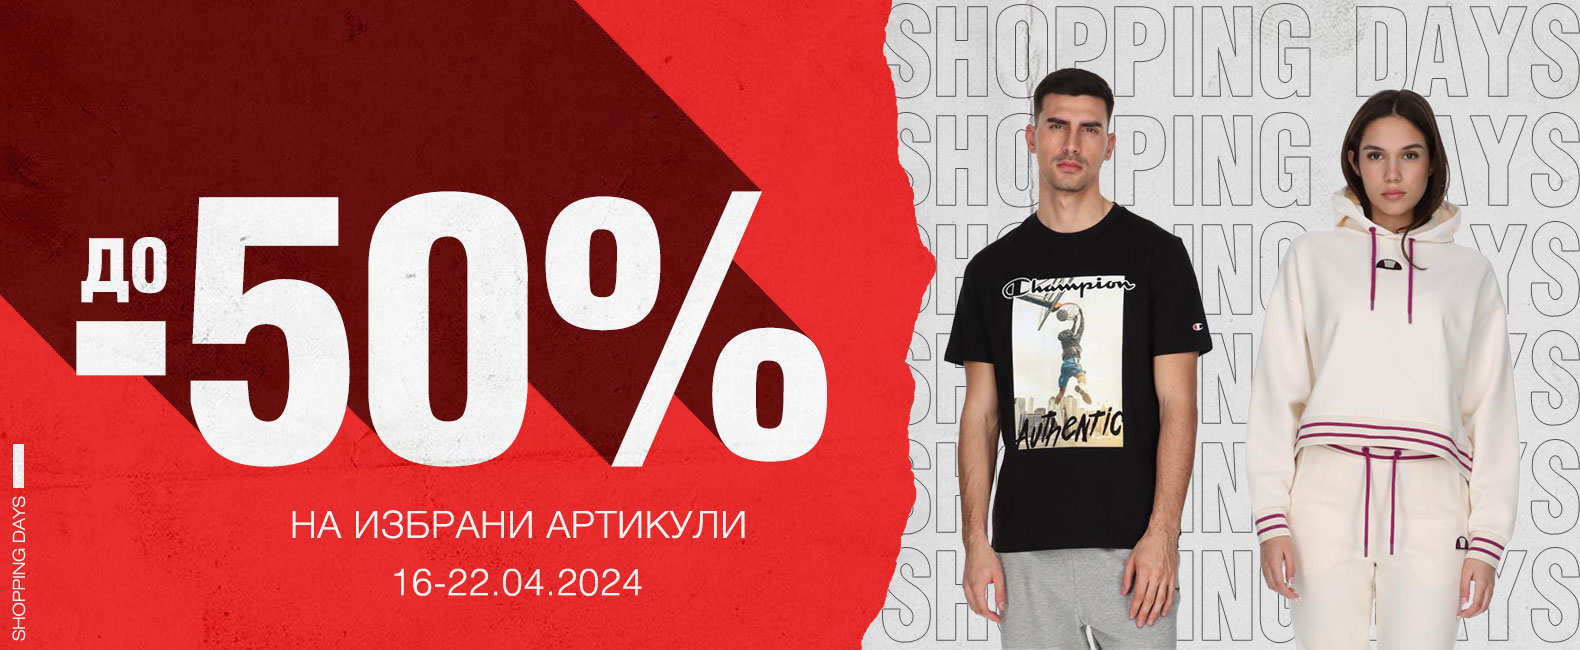 Shopping days up to-50%